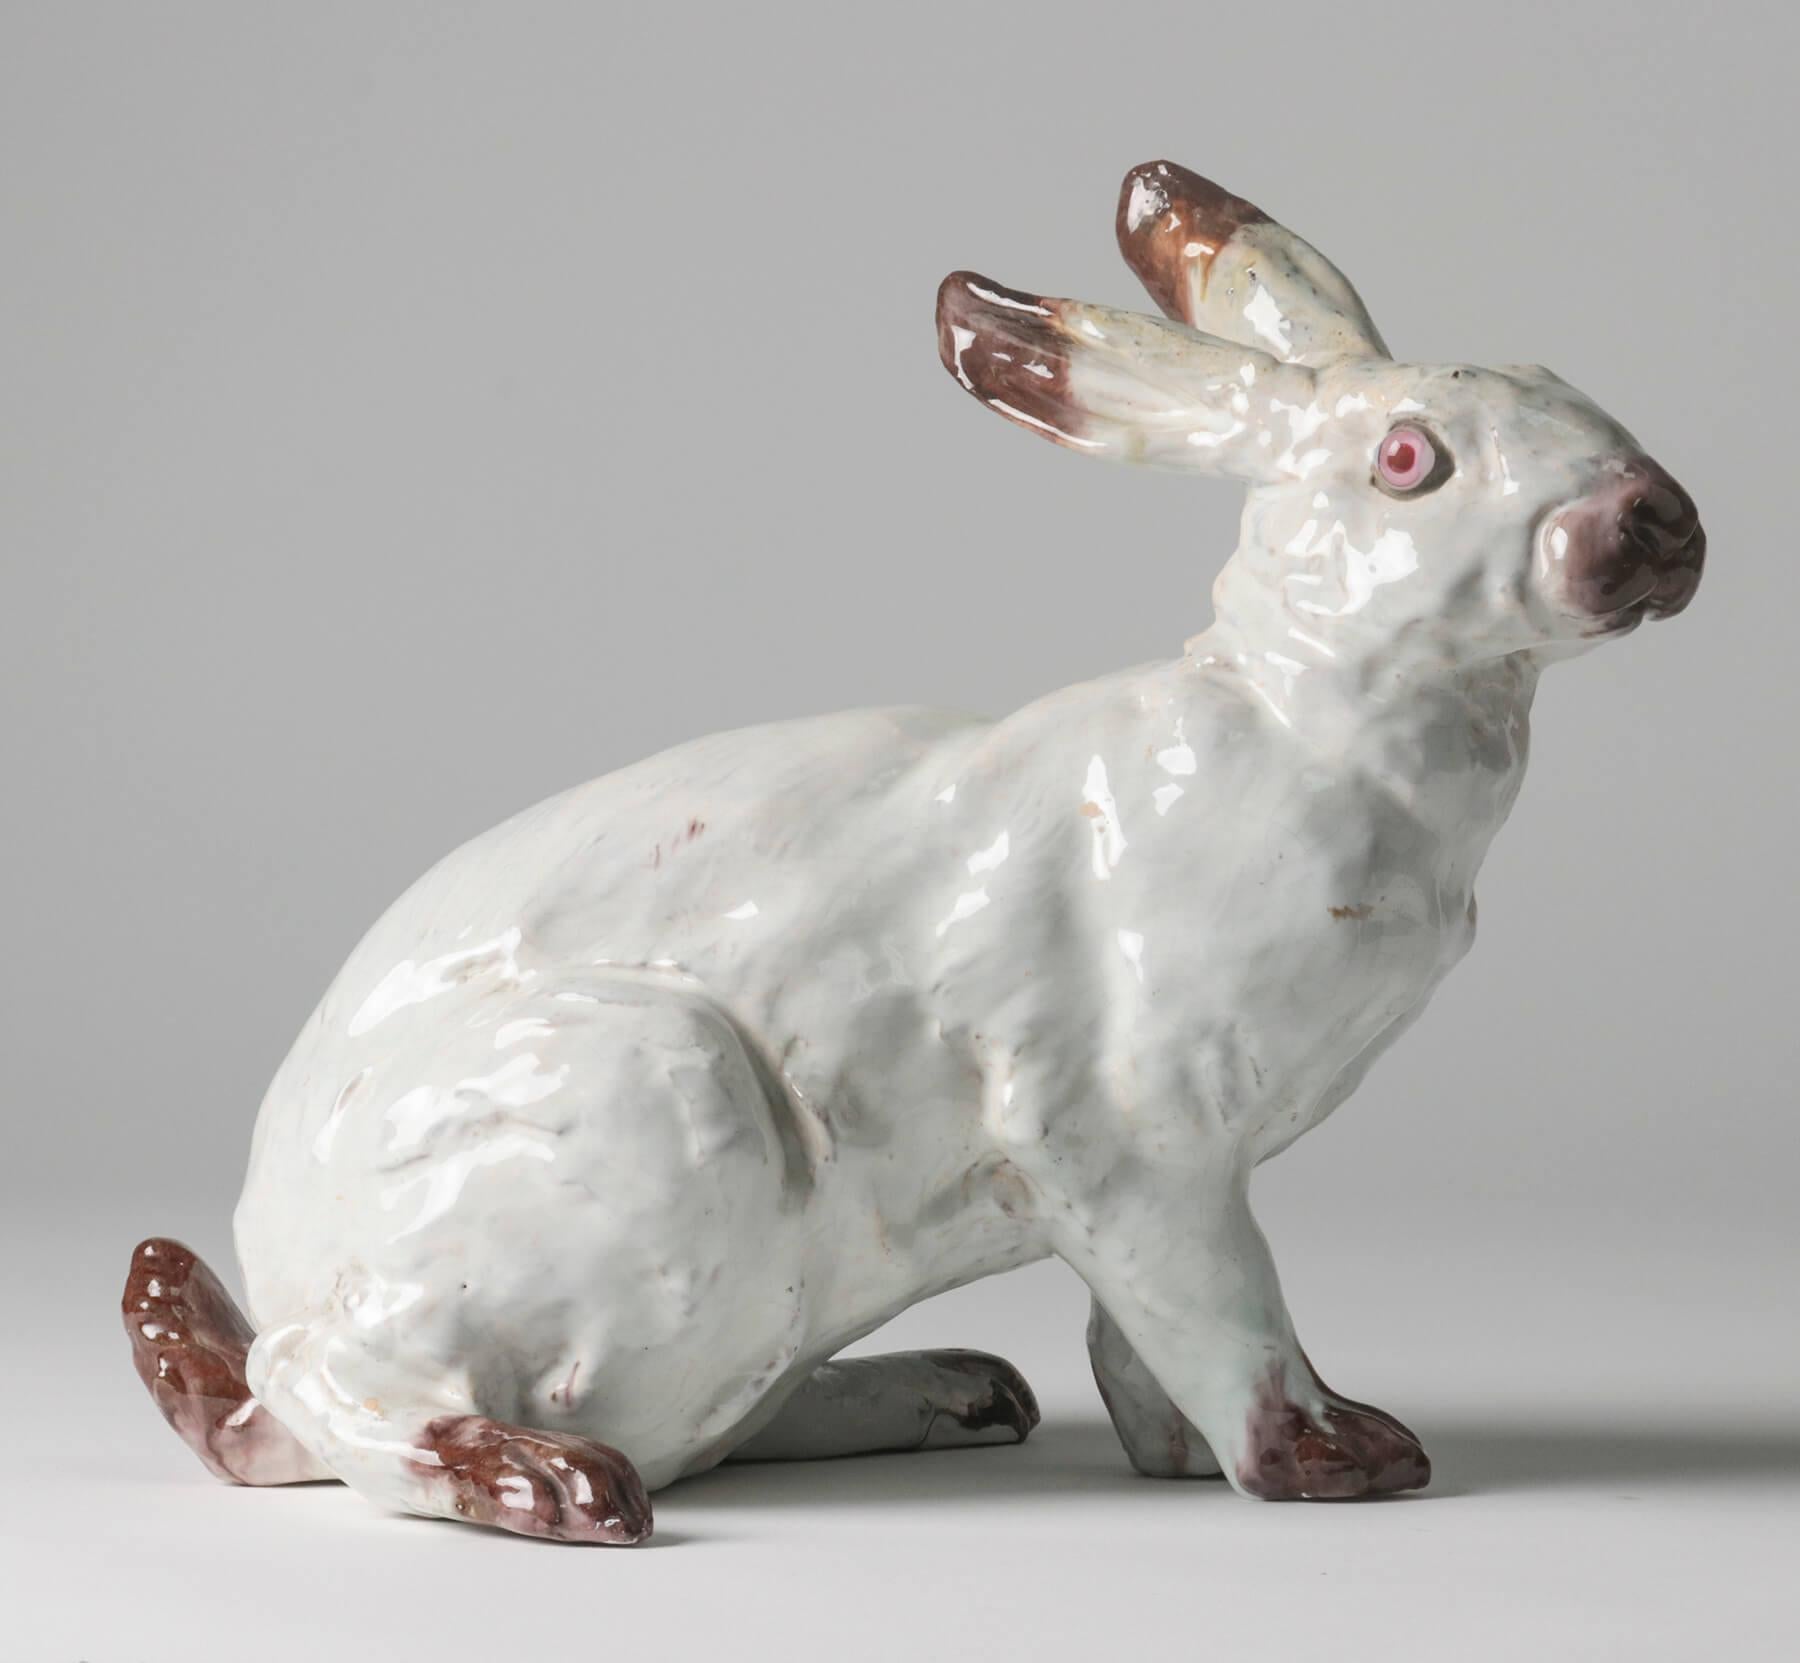 Beautiful ceramic sculpture of a white rabbit. The format is like lifelike. The appearance also has striking resemblances to a real rabbit. The anatomy, but also the imitation of the coat are beautifully shaped in this statue. The eyes are made of